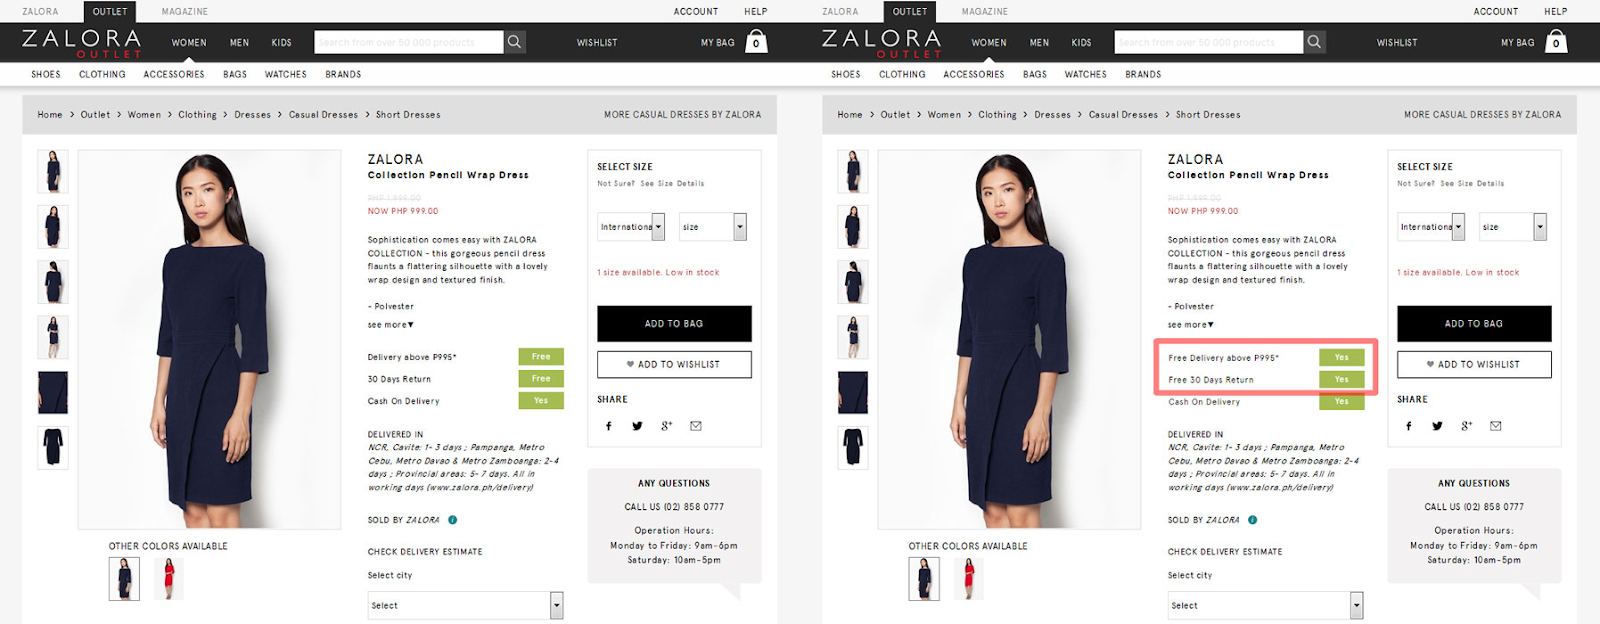 Product Pages E-Commerce A/B Testing